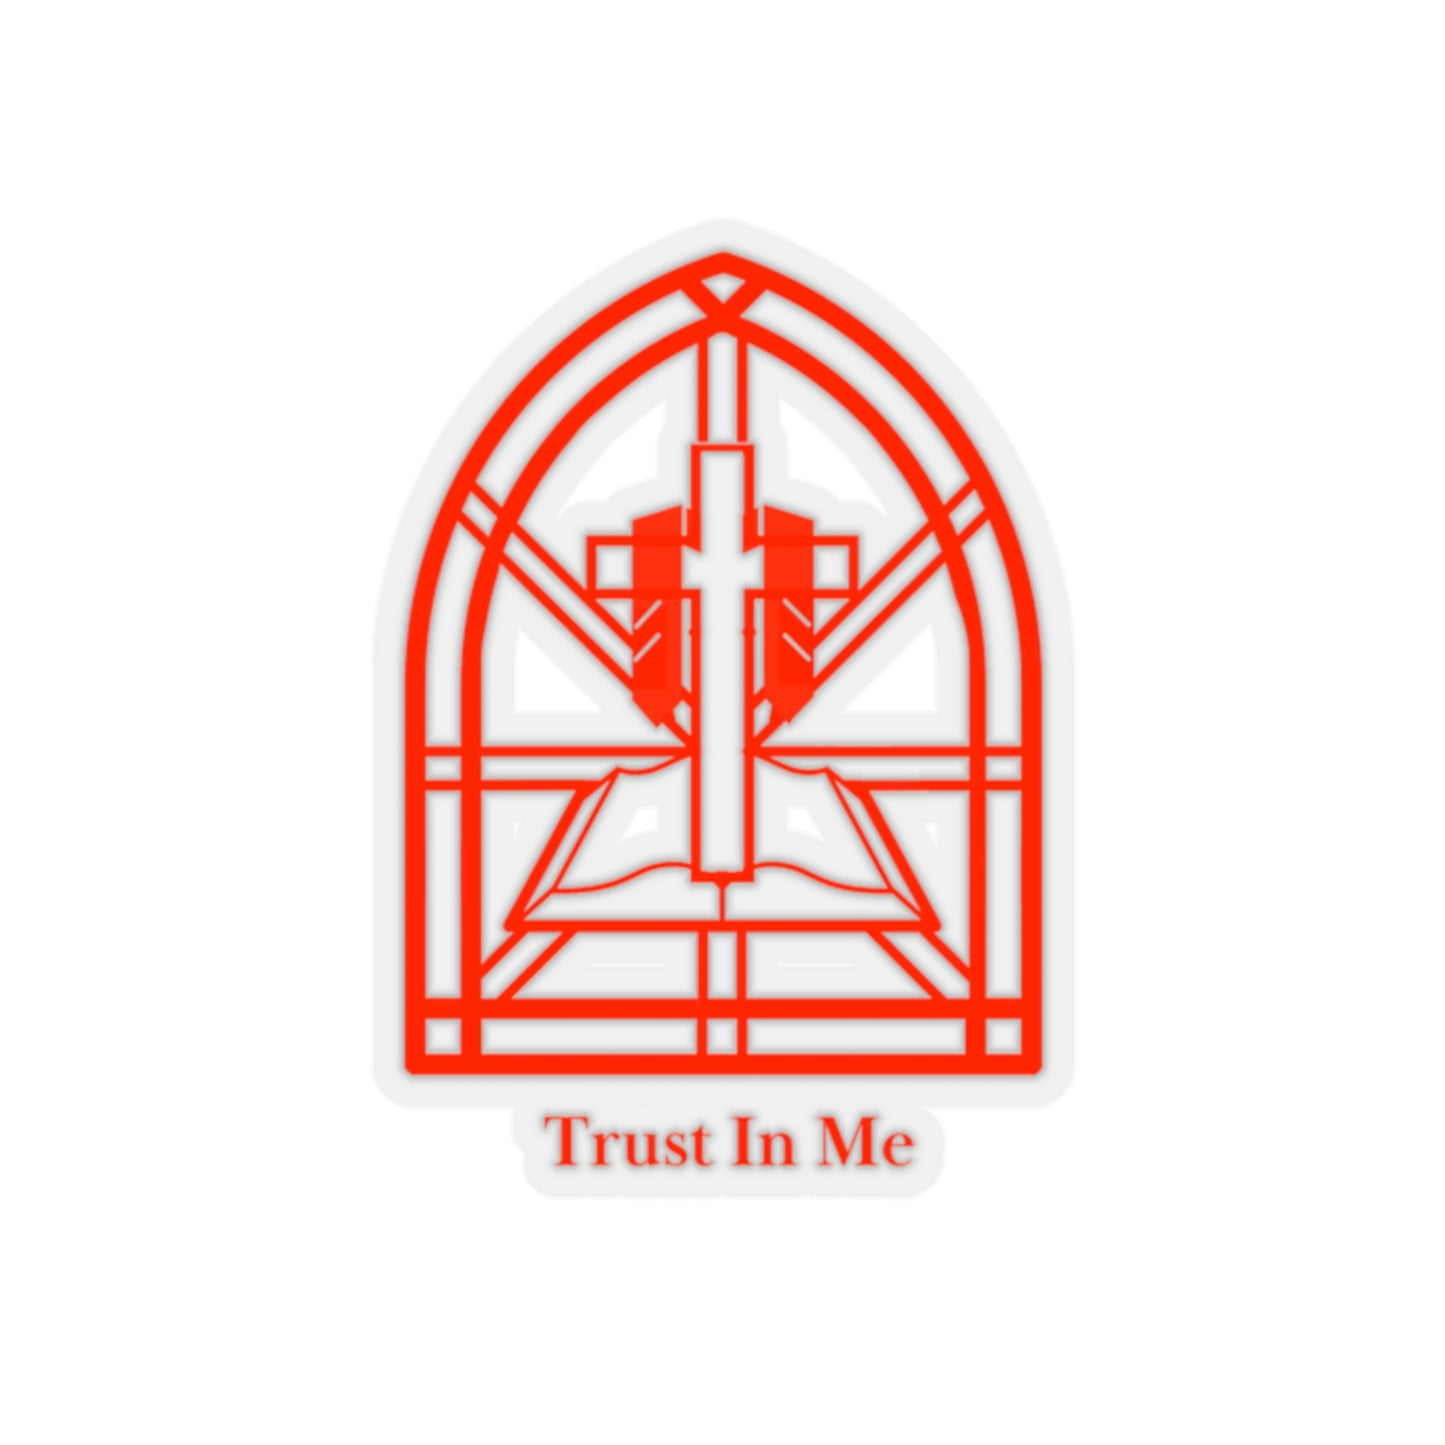 Kiss-Cut Stickers - Red color, "Trust In Me" edition